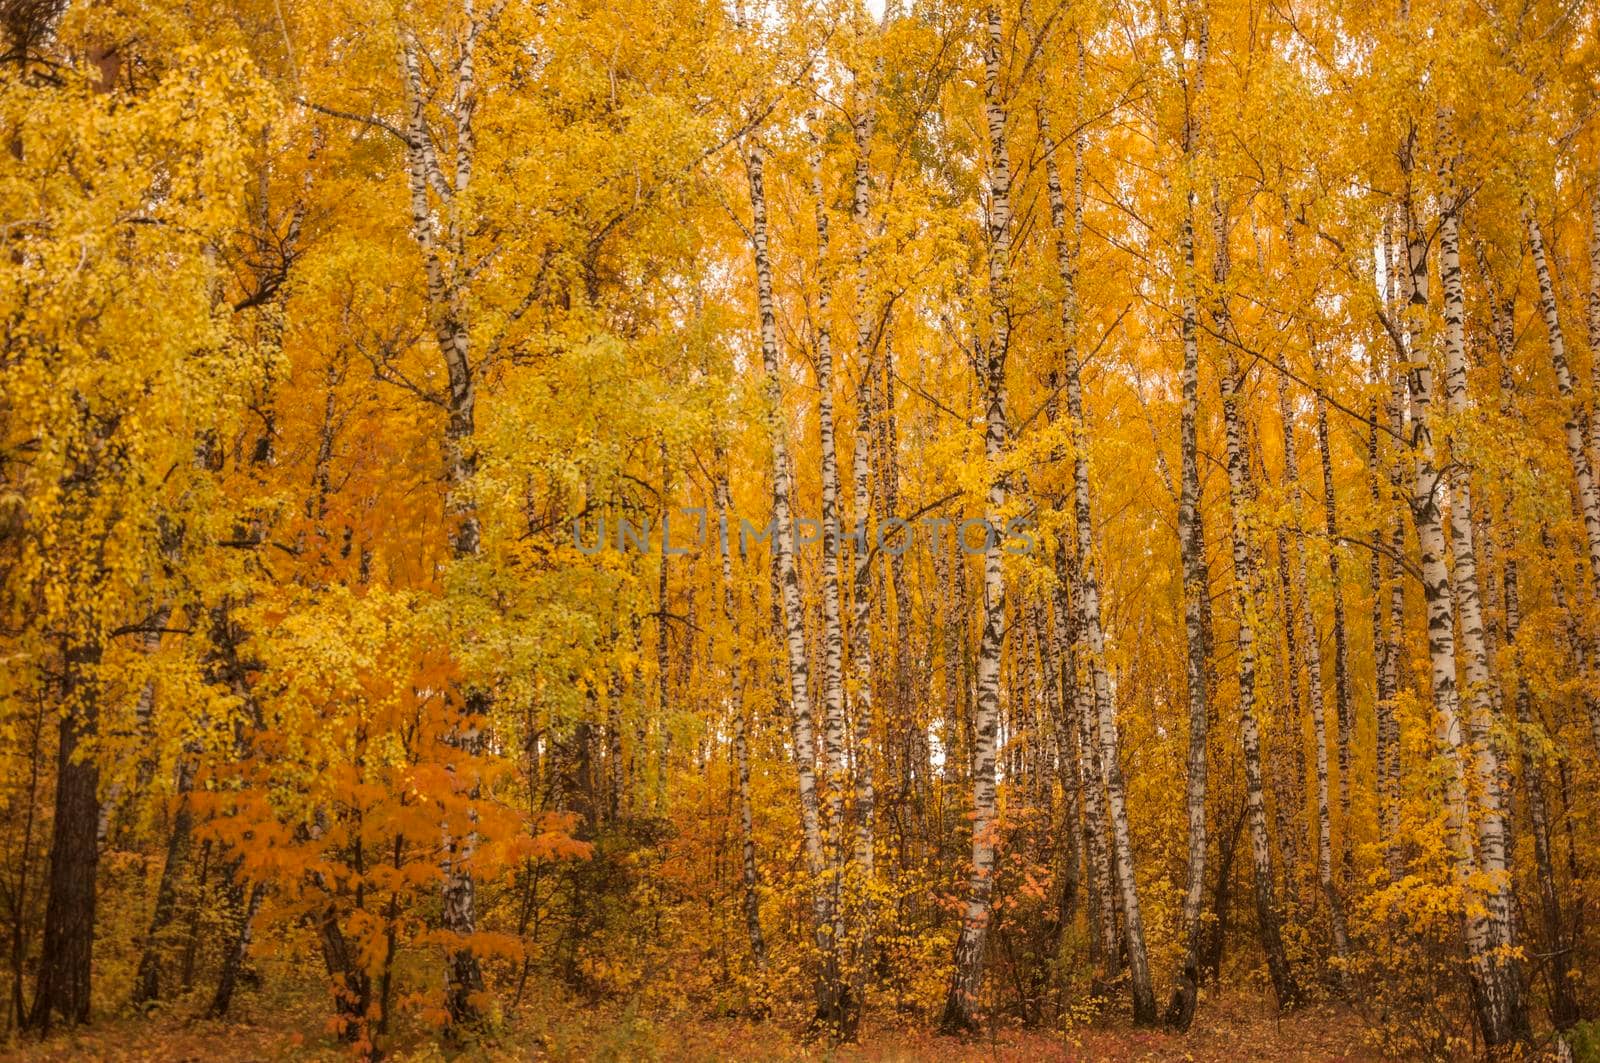 Autumn scenery. Beautiful gold fall in forest. Beautiful scene with birches in yellow autumn birch forest in october among other birches in birch grove